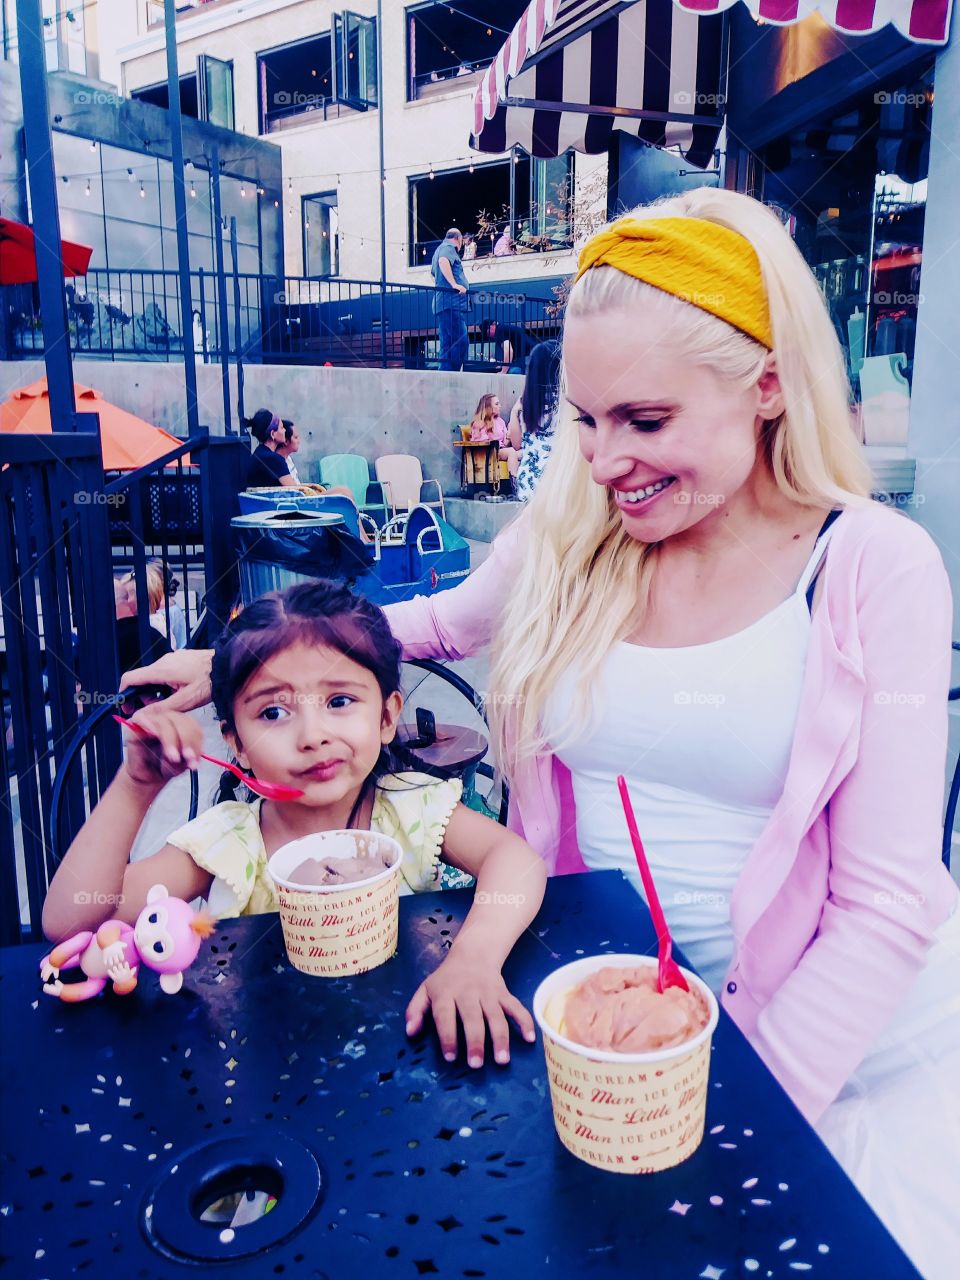 mother and daughter enjoying vegan Icecream together
family time